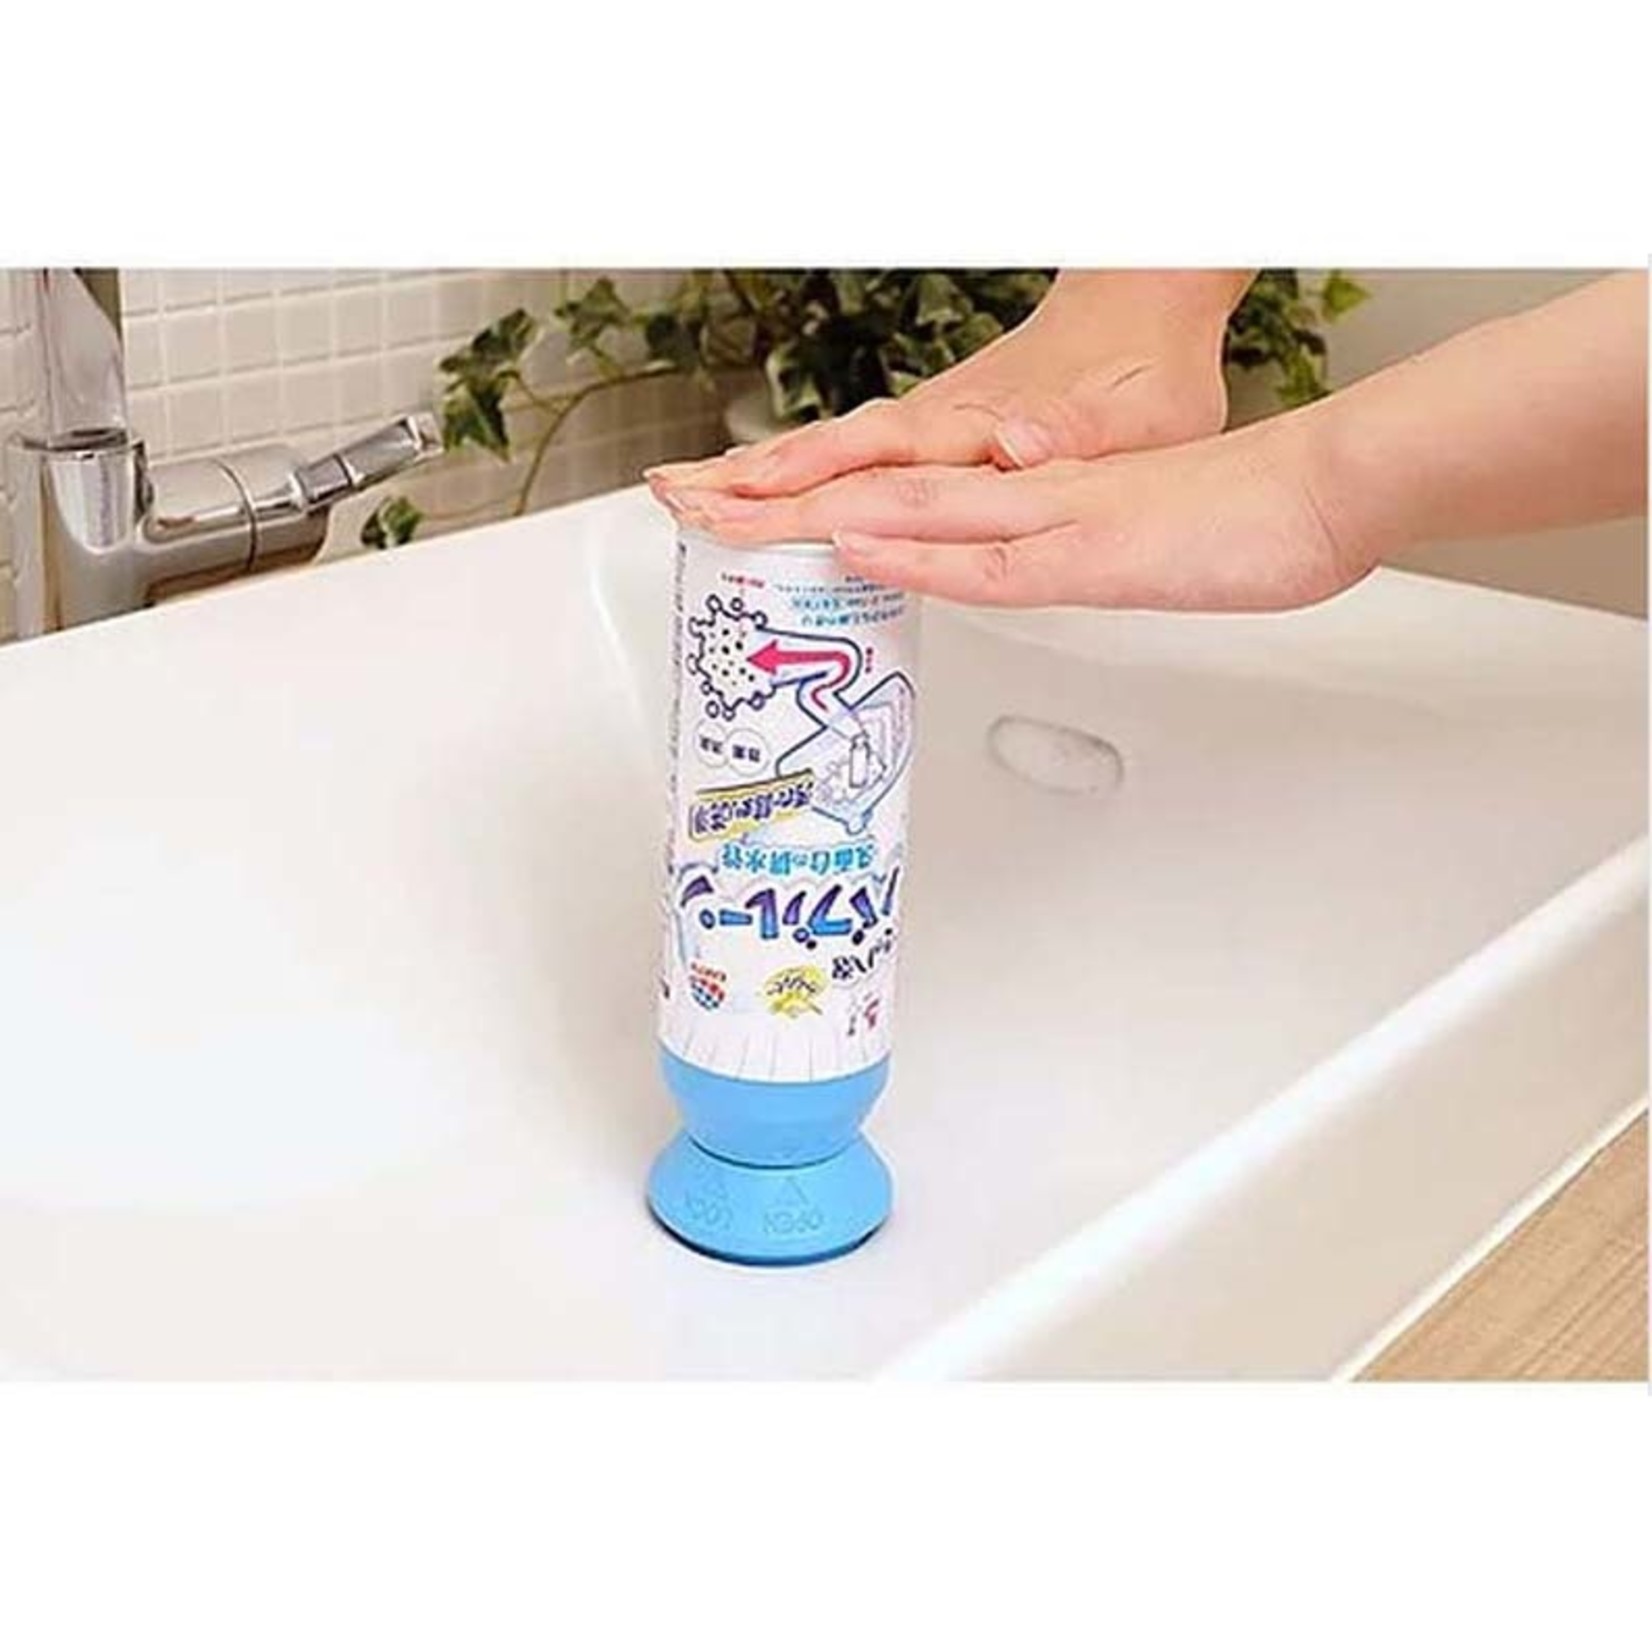 Earth Foaming Cleaner for Drain of Sink 200ml